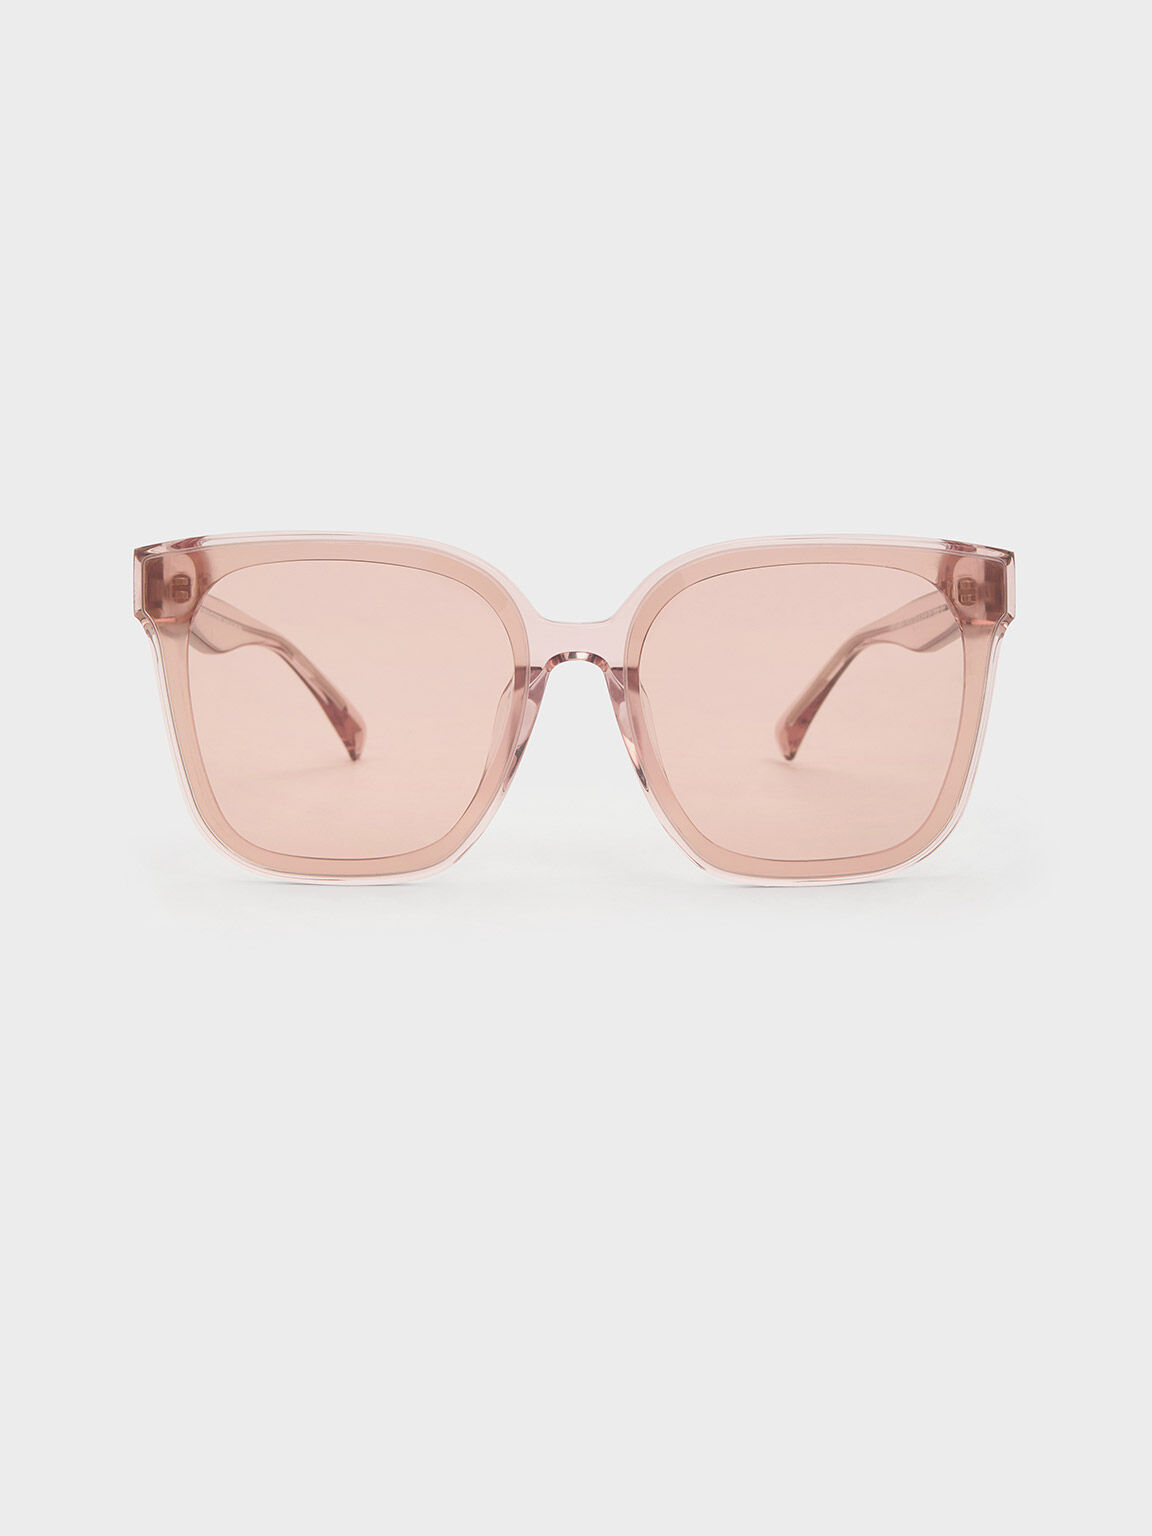 Women's Sunglasses | Exclusives Styles | CHARLES & KEITH SG